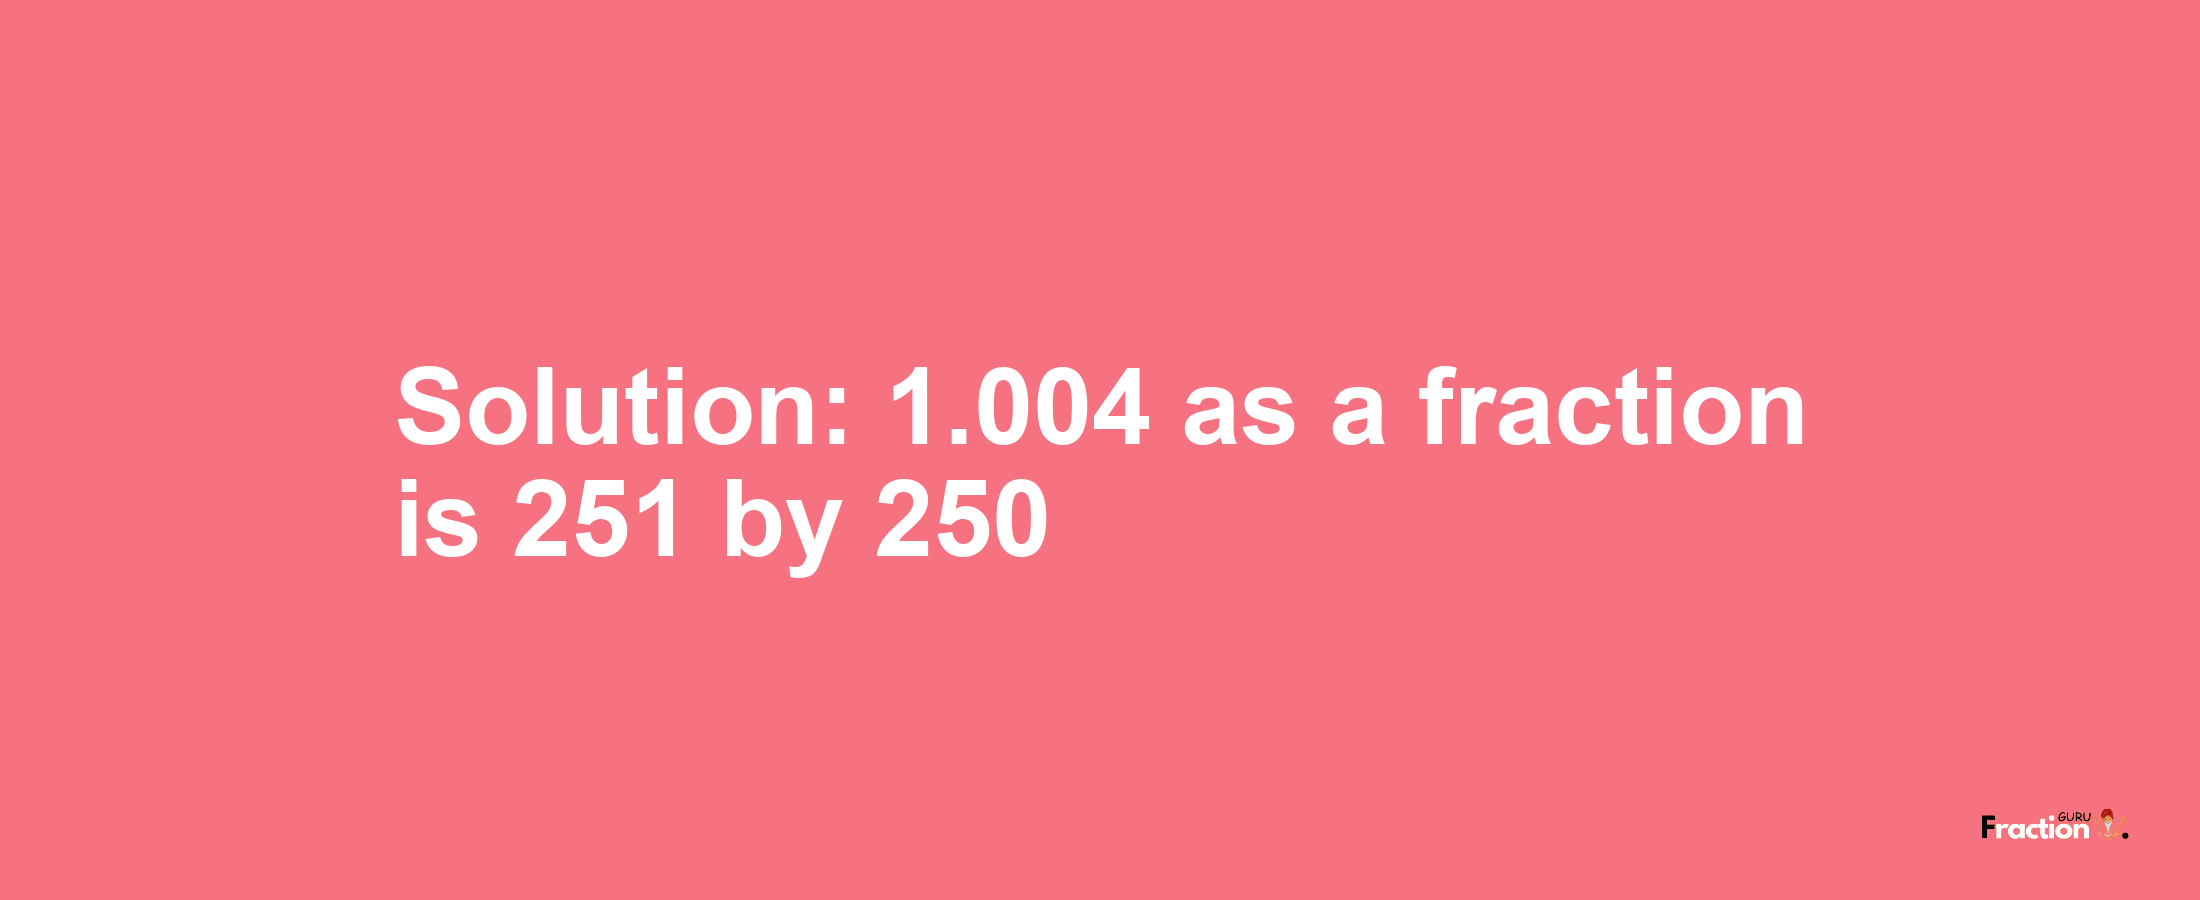 Solution:1.004 as a fraction is 251/250